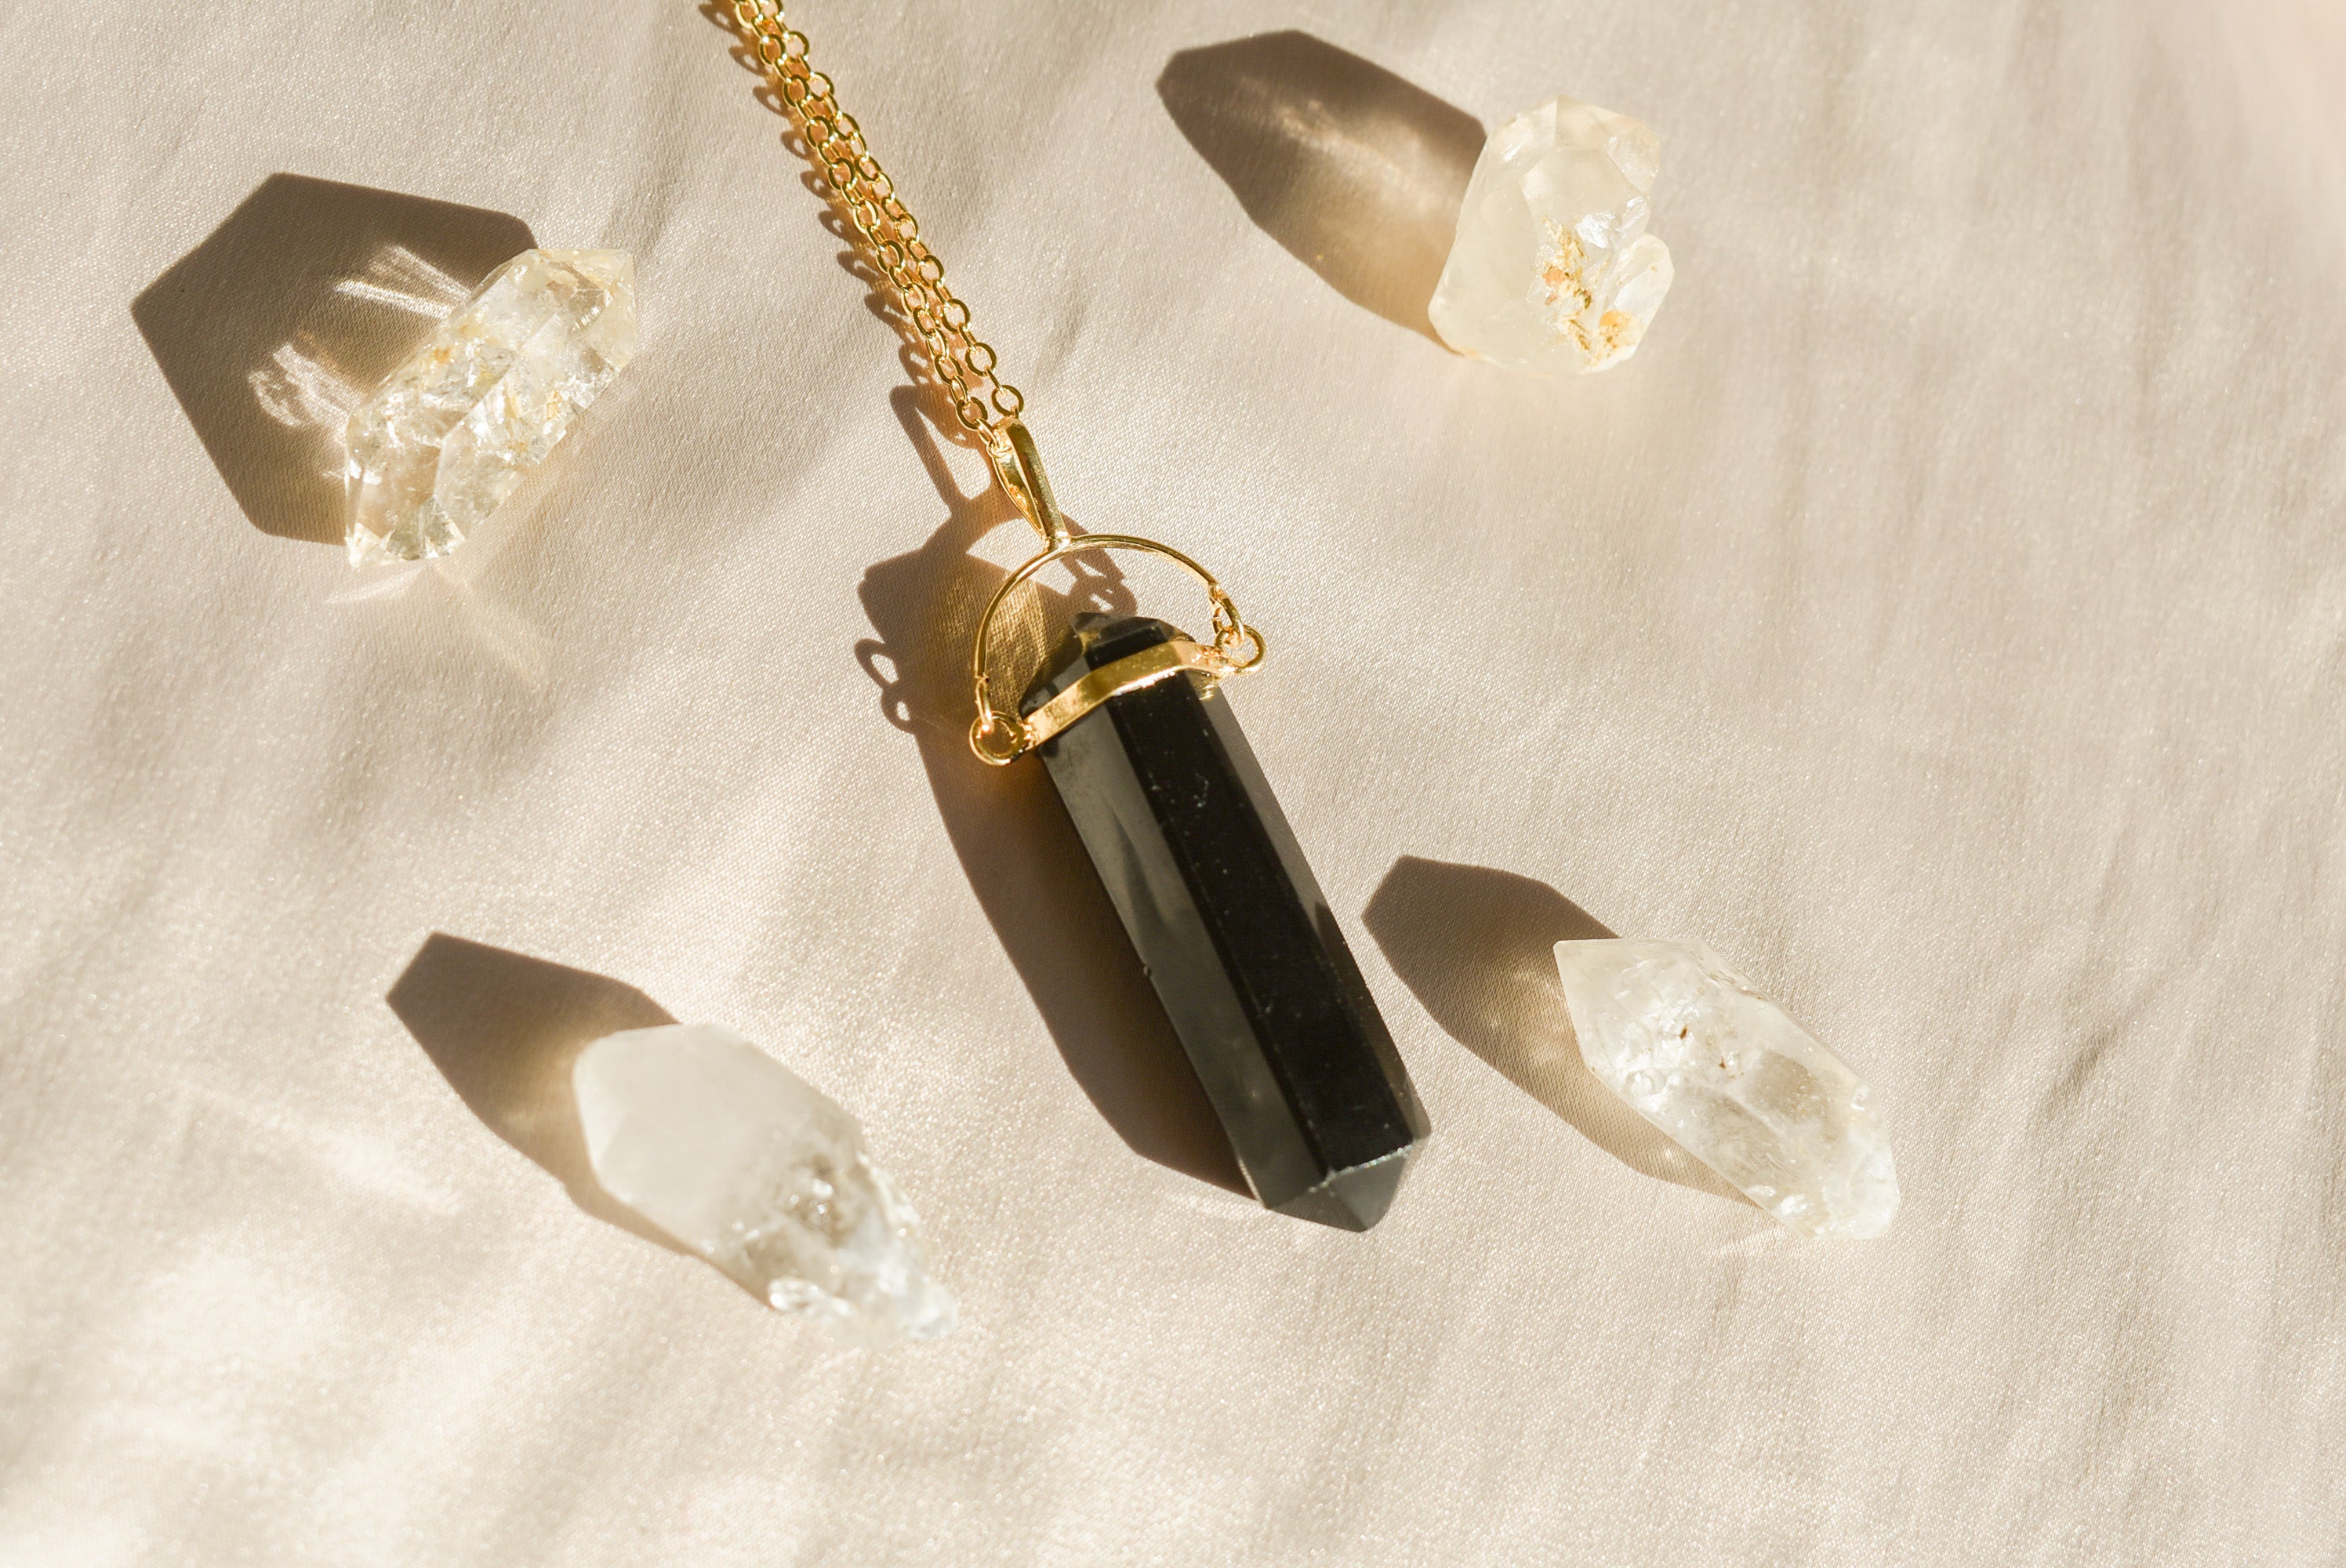 Onyx Protection Necklace Gold Filled